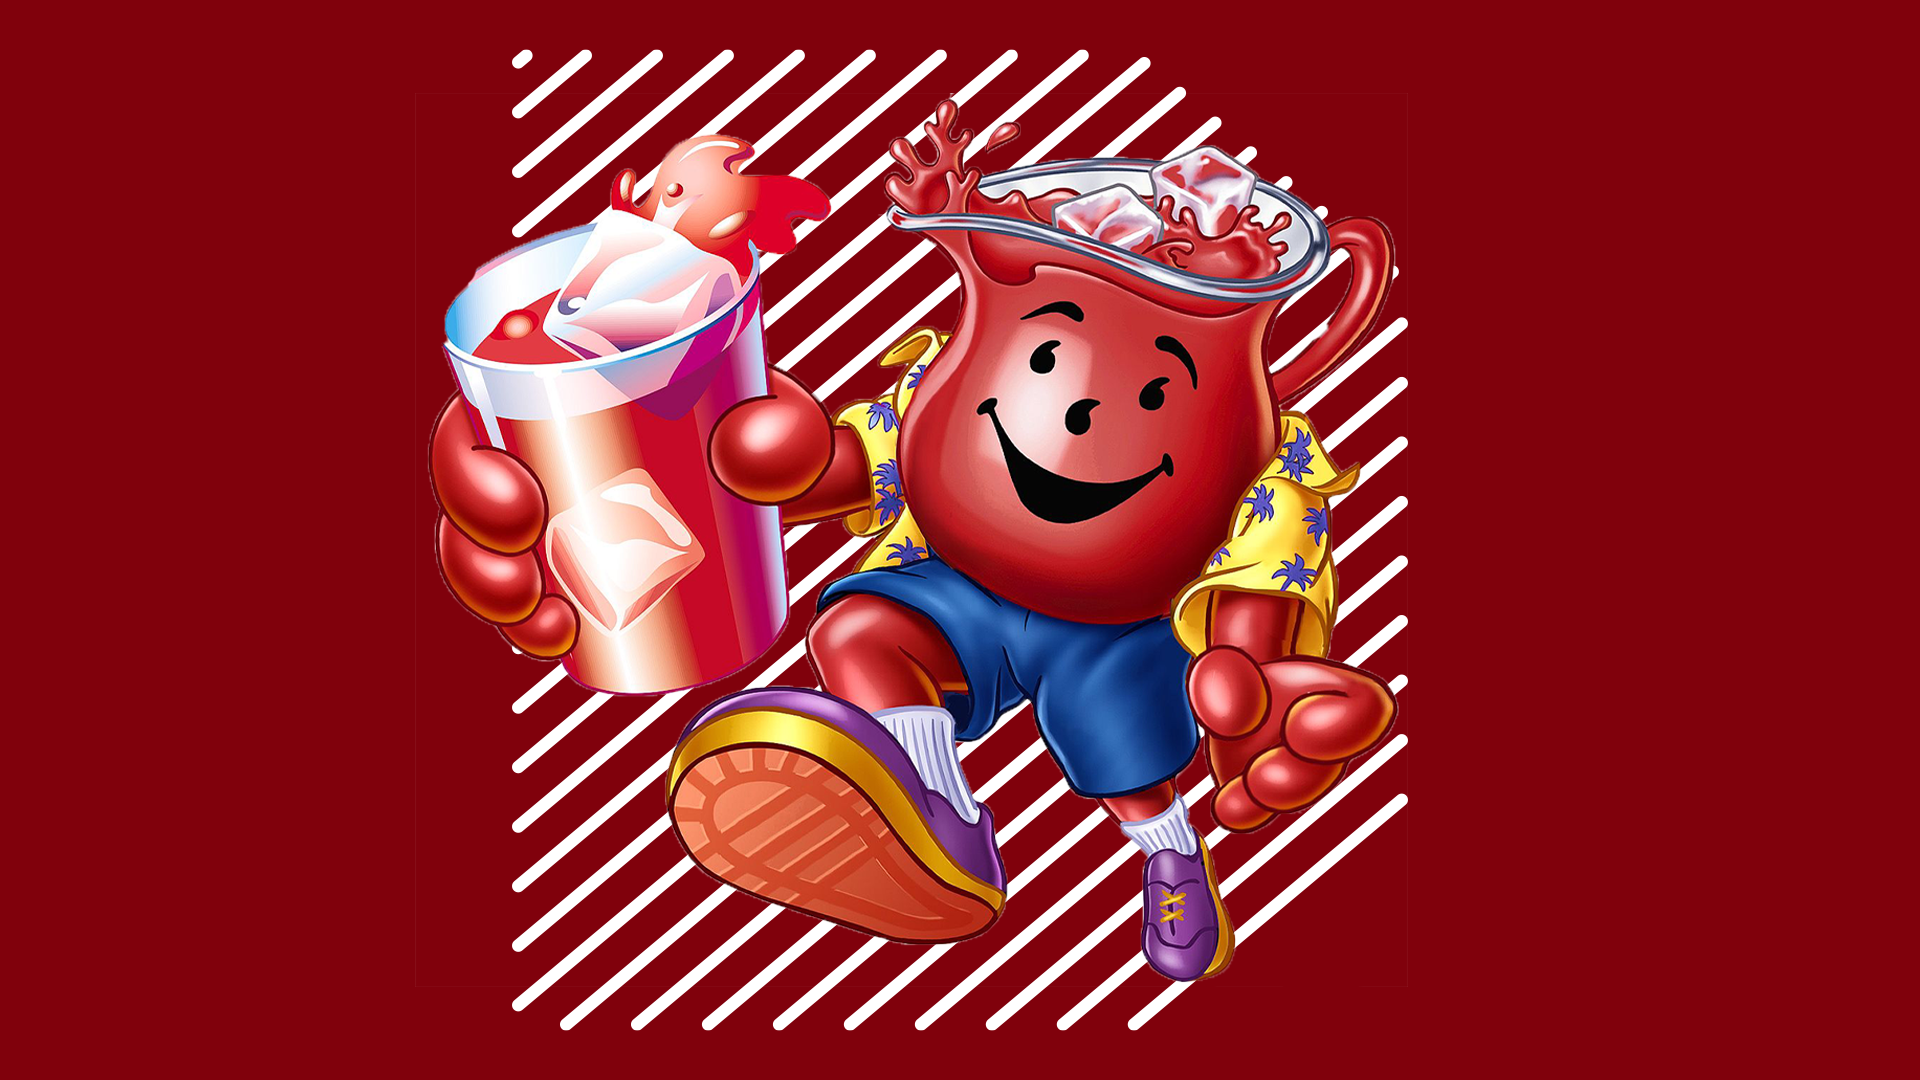 Oh Yeah: A Brief History Of Kool-Aid’s Hype Man